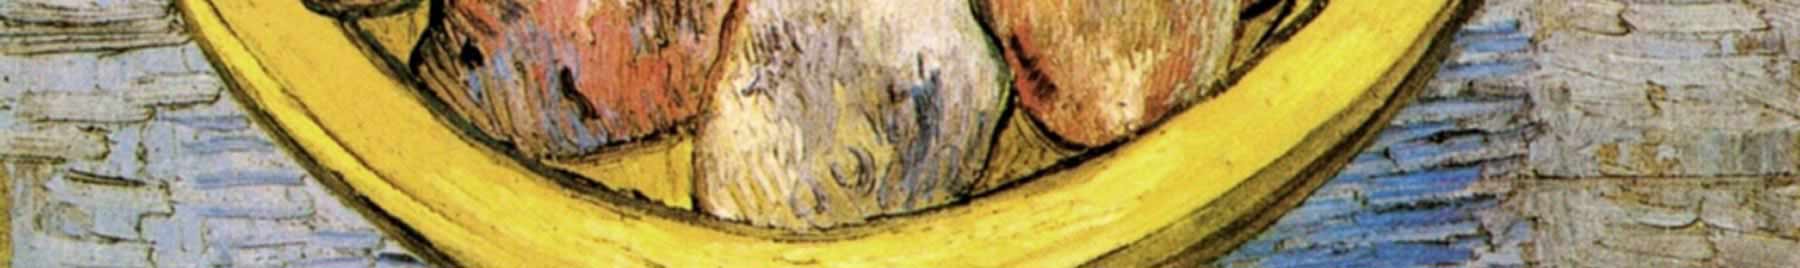 detail from Vincent van Gogh’s Still Life: Potatoes in a Yellow Dish